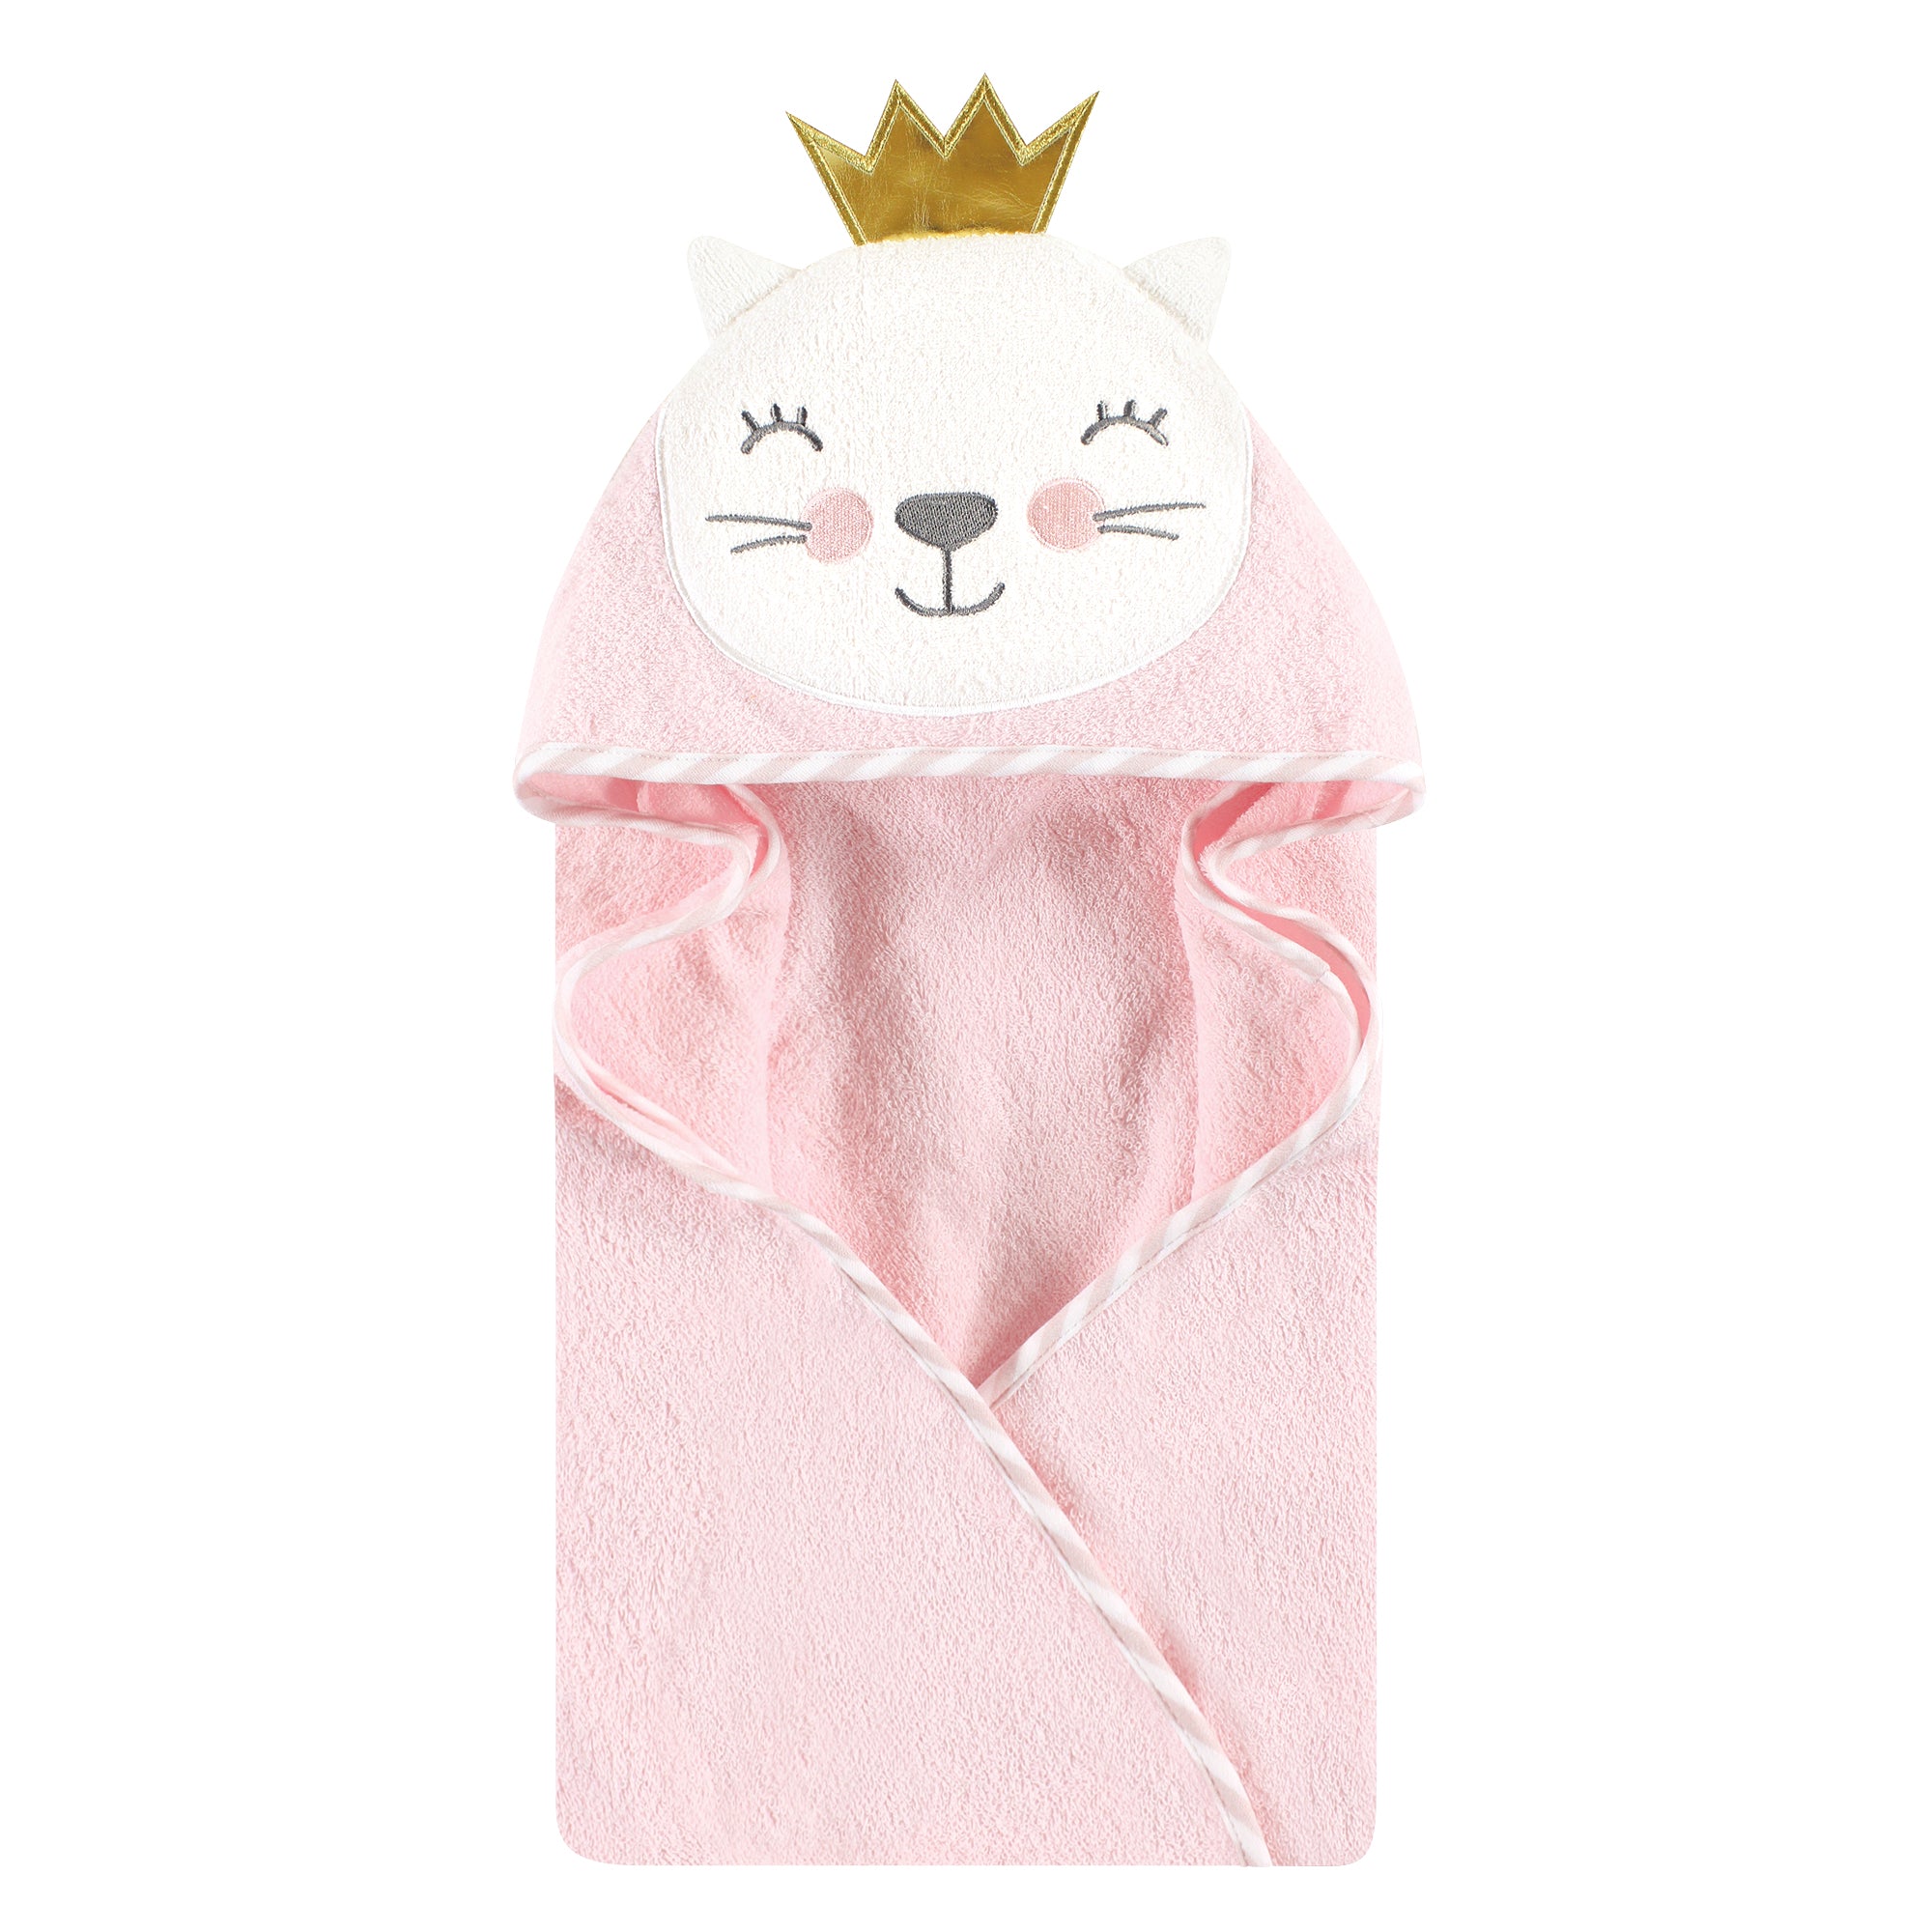 Hudson Baby Cotton Animal Face Hooded Towel